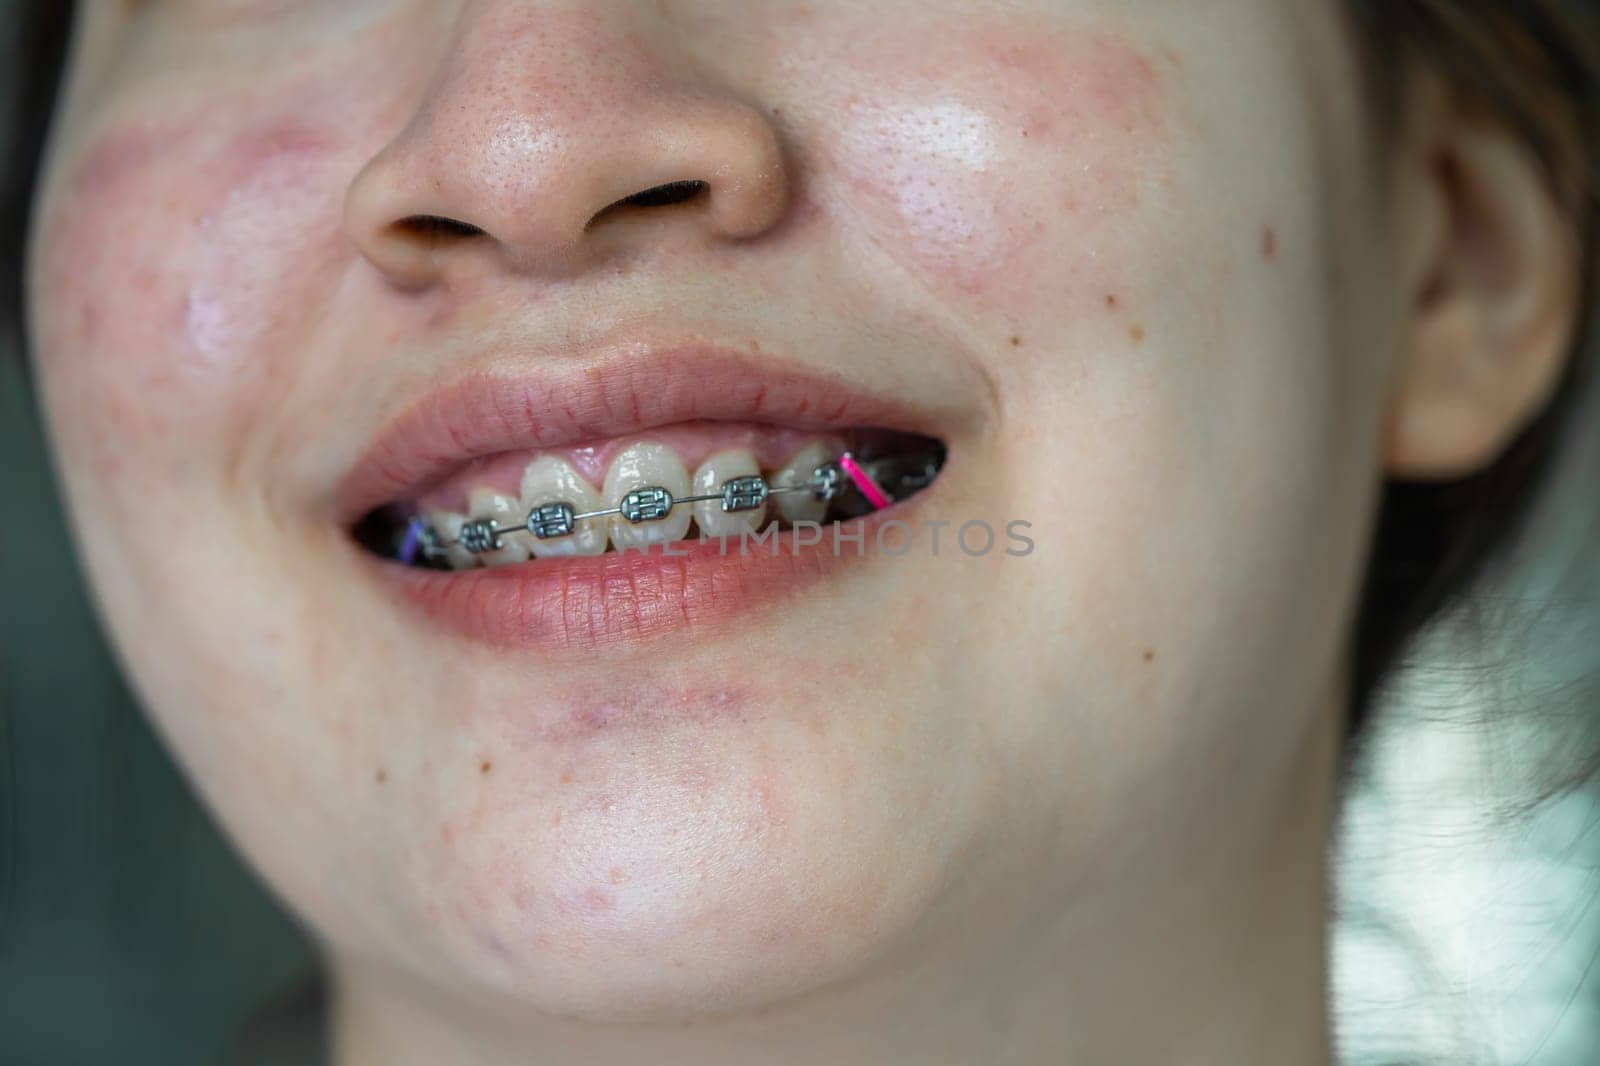 Braces in teenage girl mouth to treat and beauty for increase confidence and good personality. by pamai